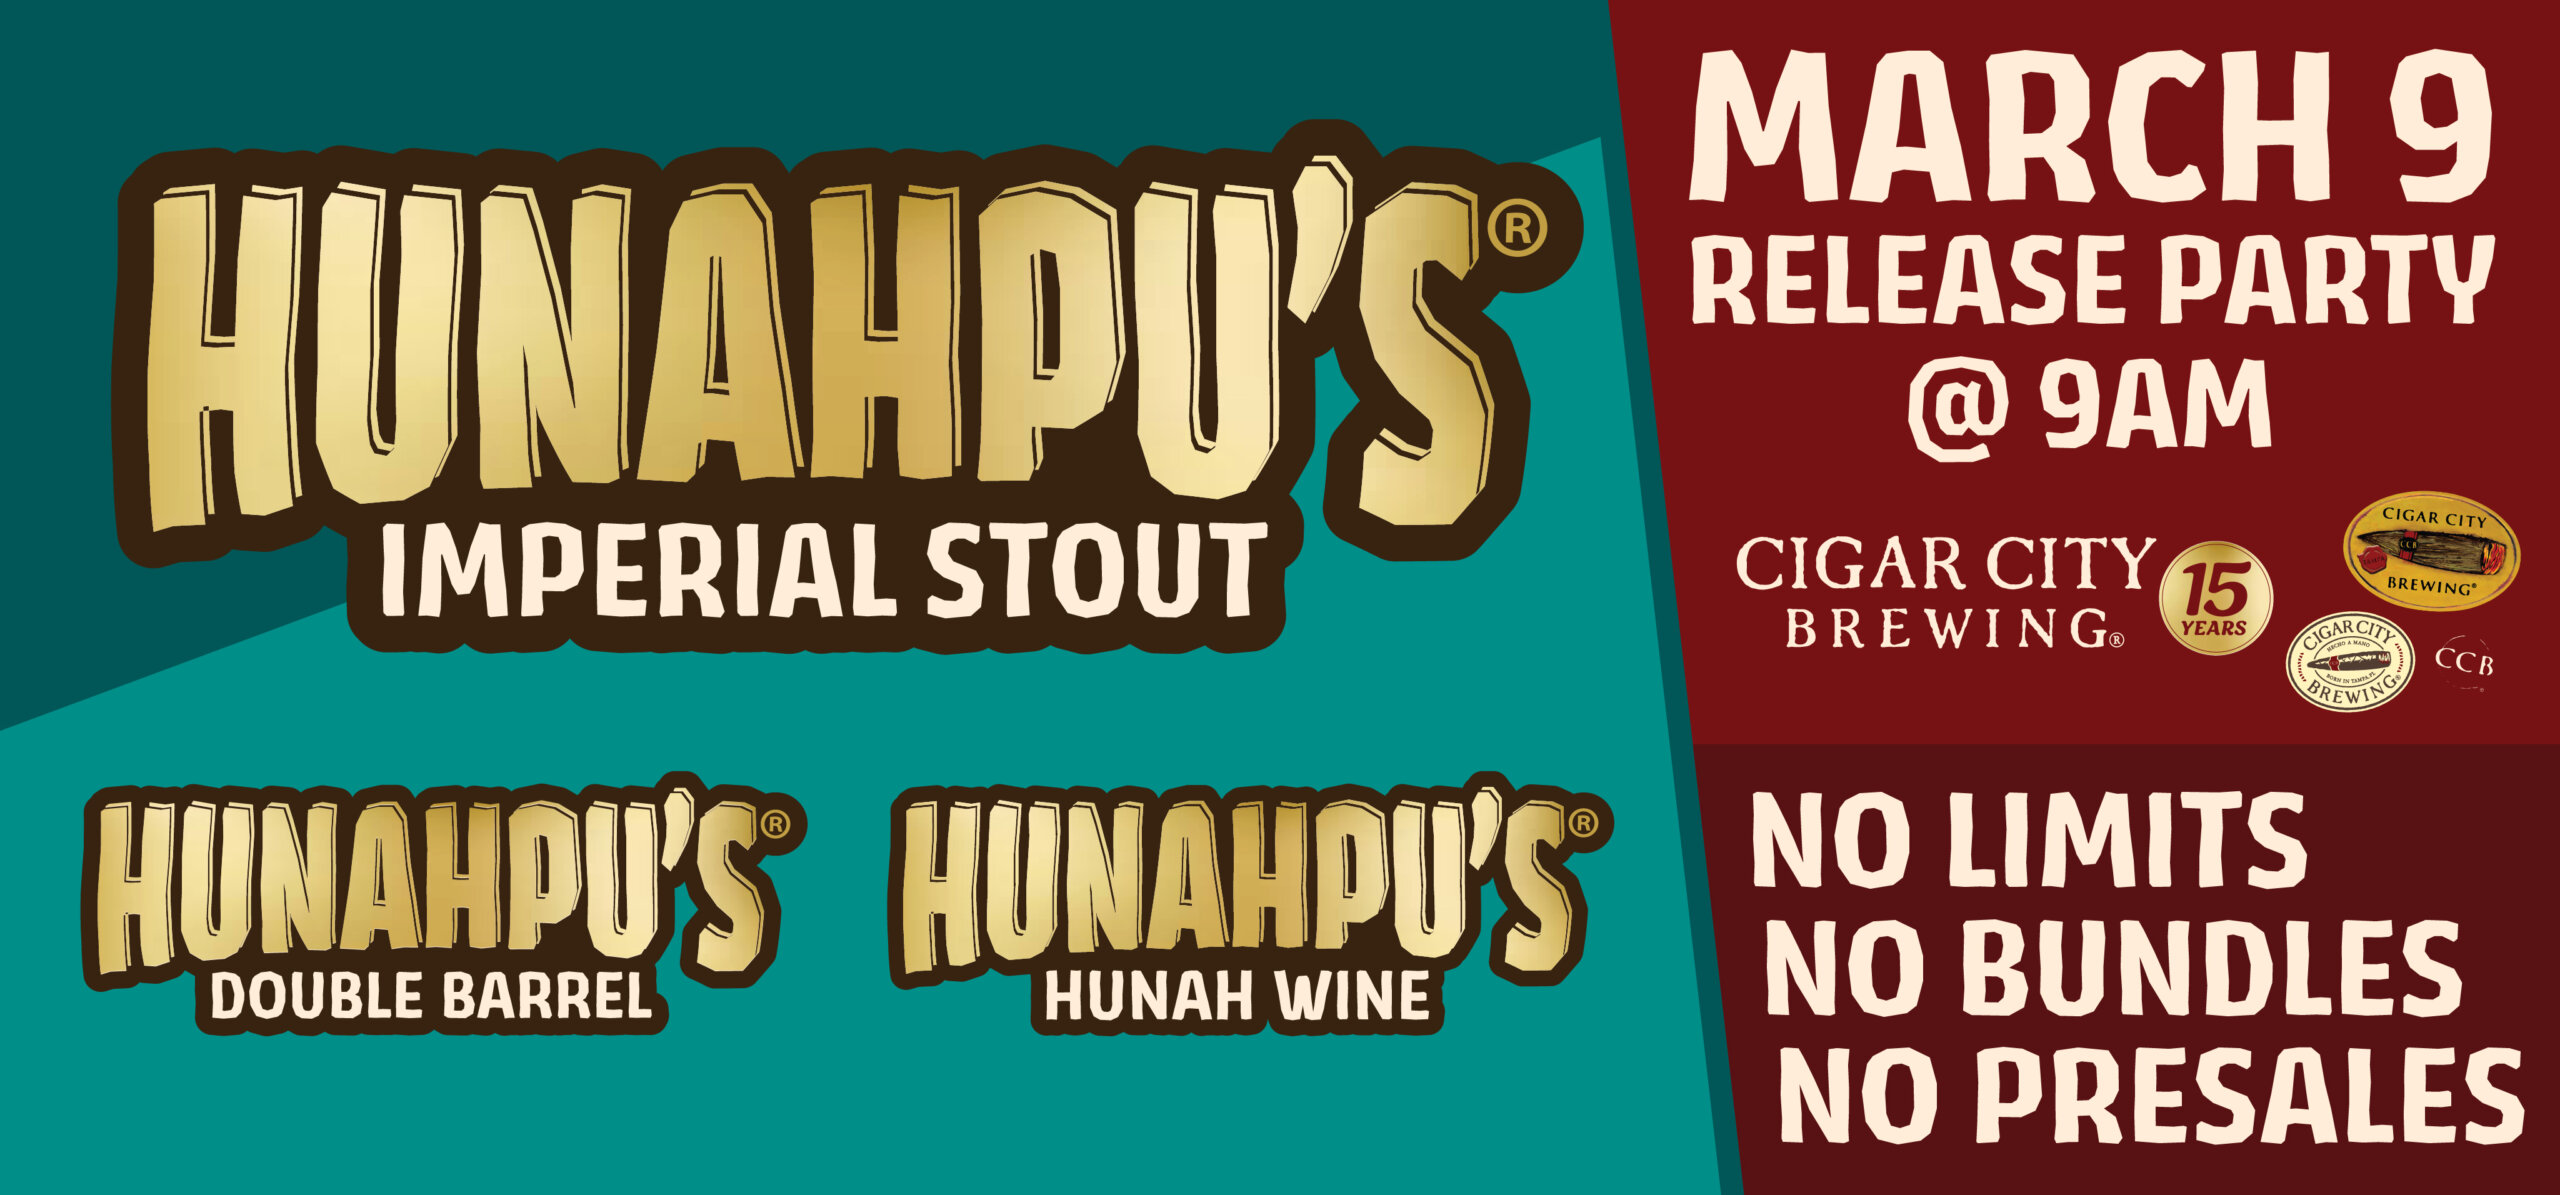 Image featuring logos for Hunahpu's Imperial Stout, Hunahpu's Double Barrel, and Hunahpu's Hunah Wine. Overlaid text says March 9 Release Party at 9 AM and mentions no limits, no bundles, no presales.